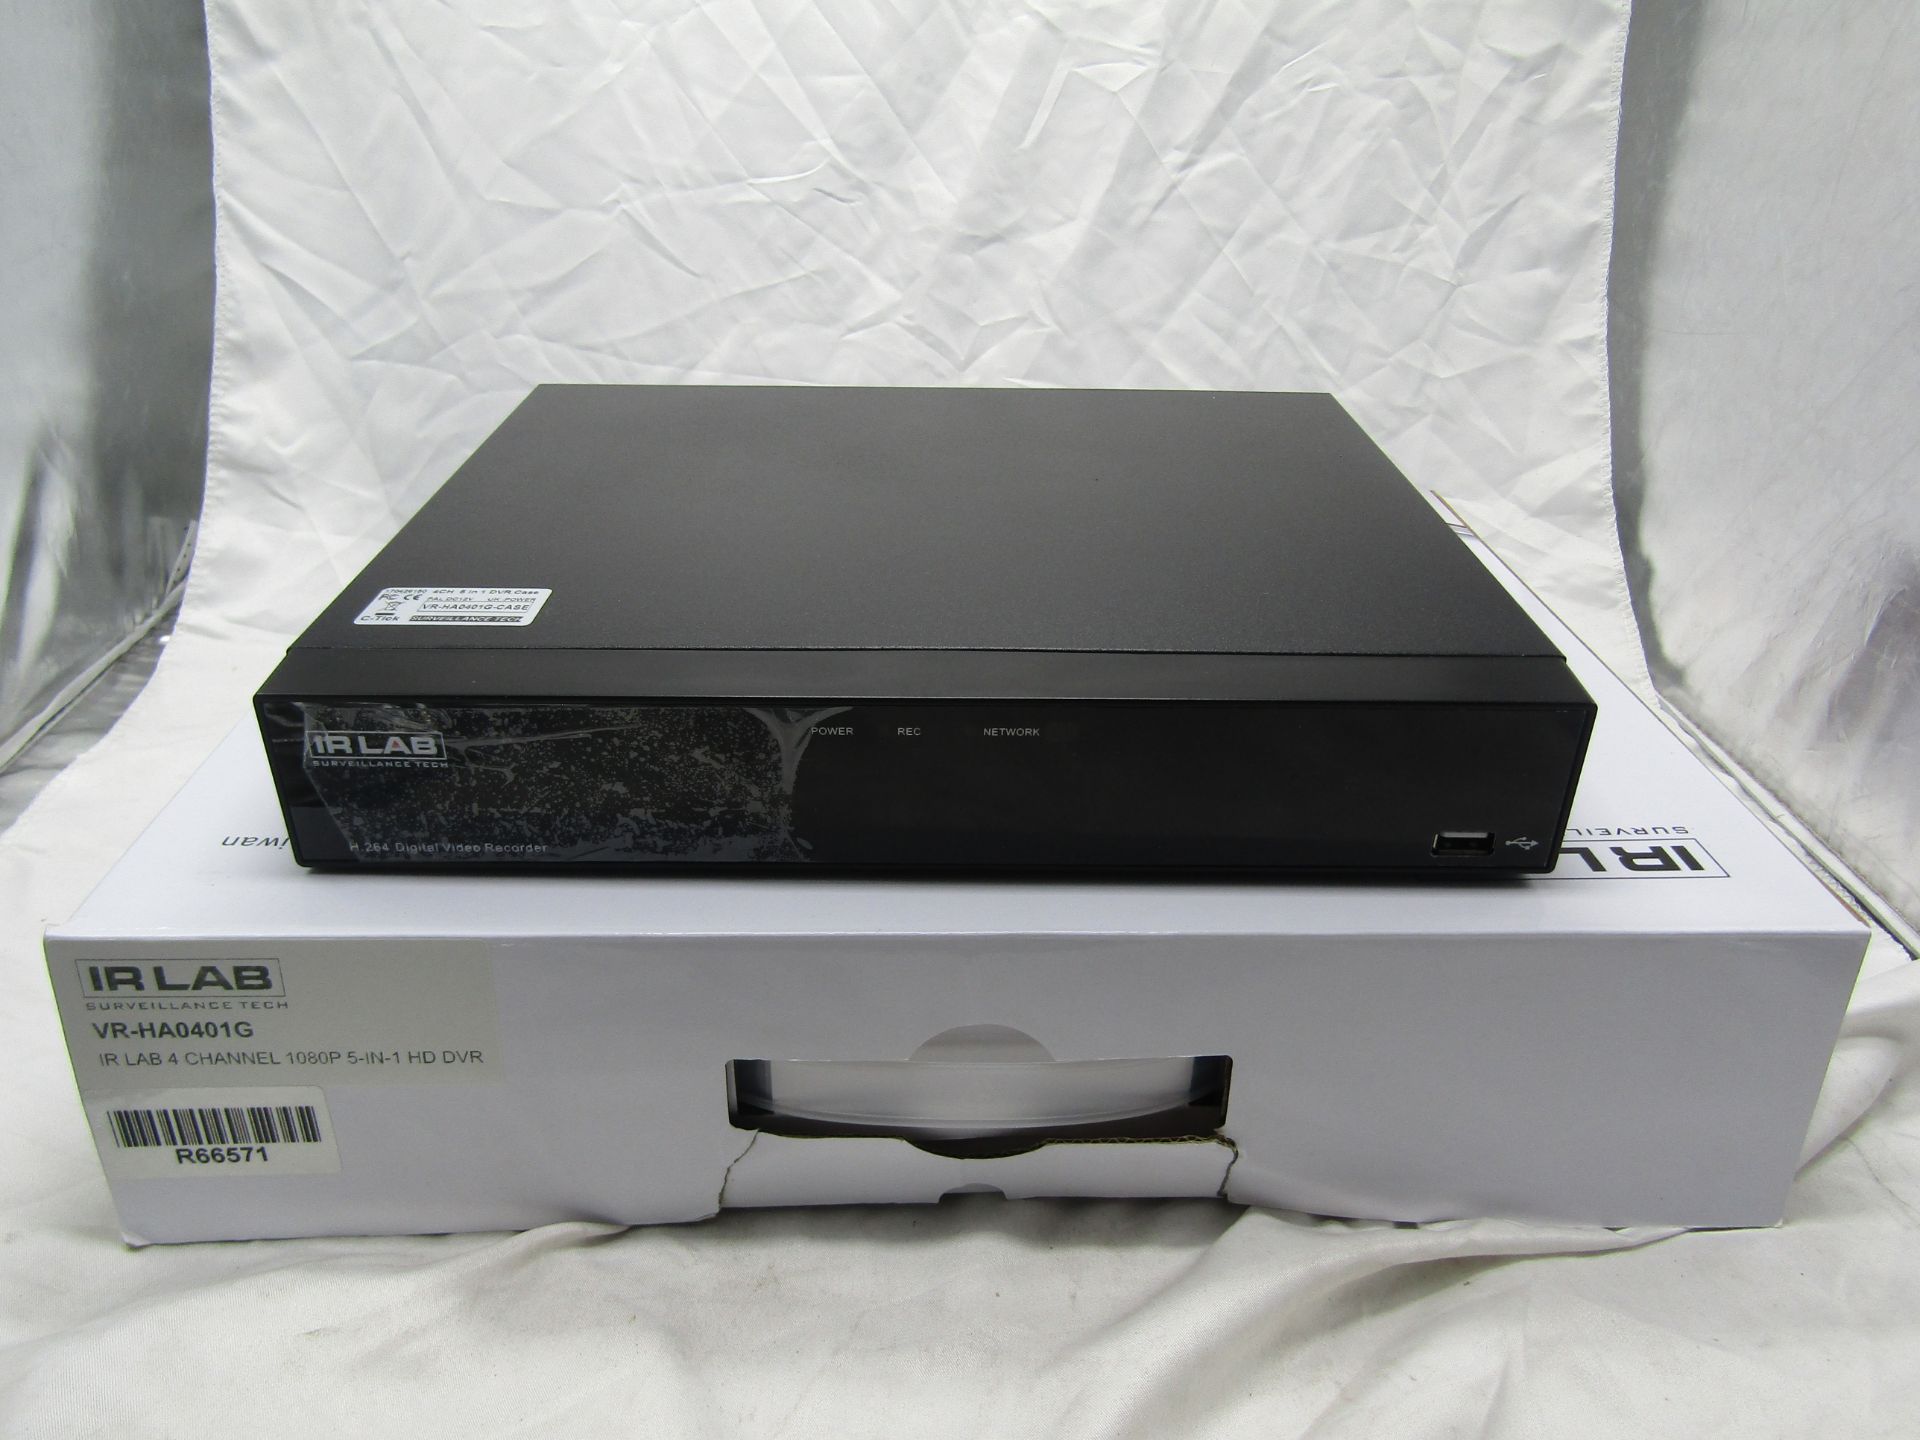 one lot of over 200 items of CCTV and Surveillance equipment, includes DVRs, Cameras, Thermal - Image 7 of 104